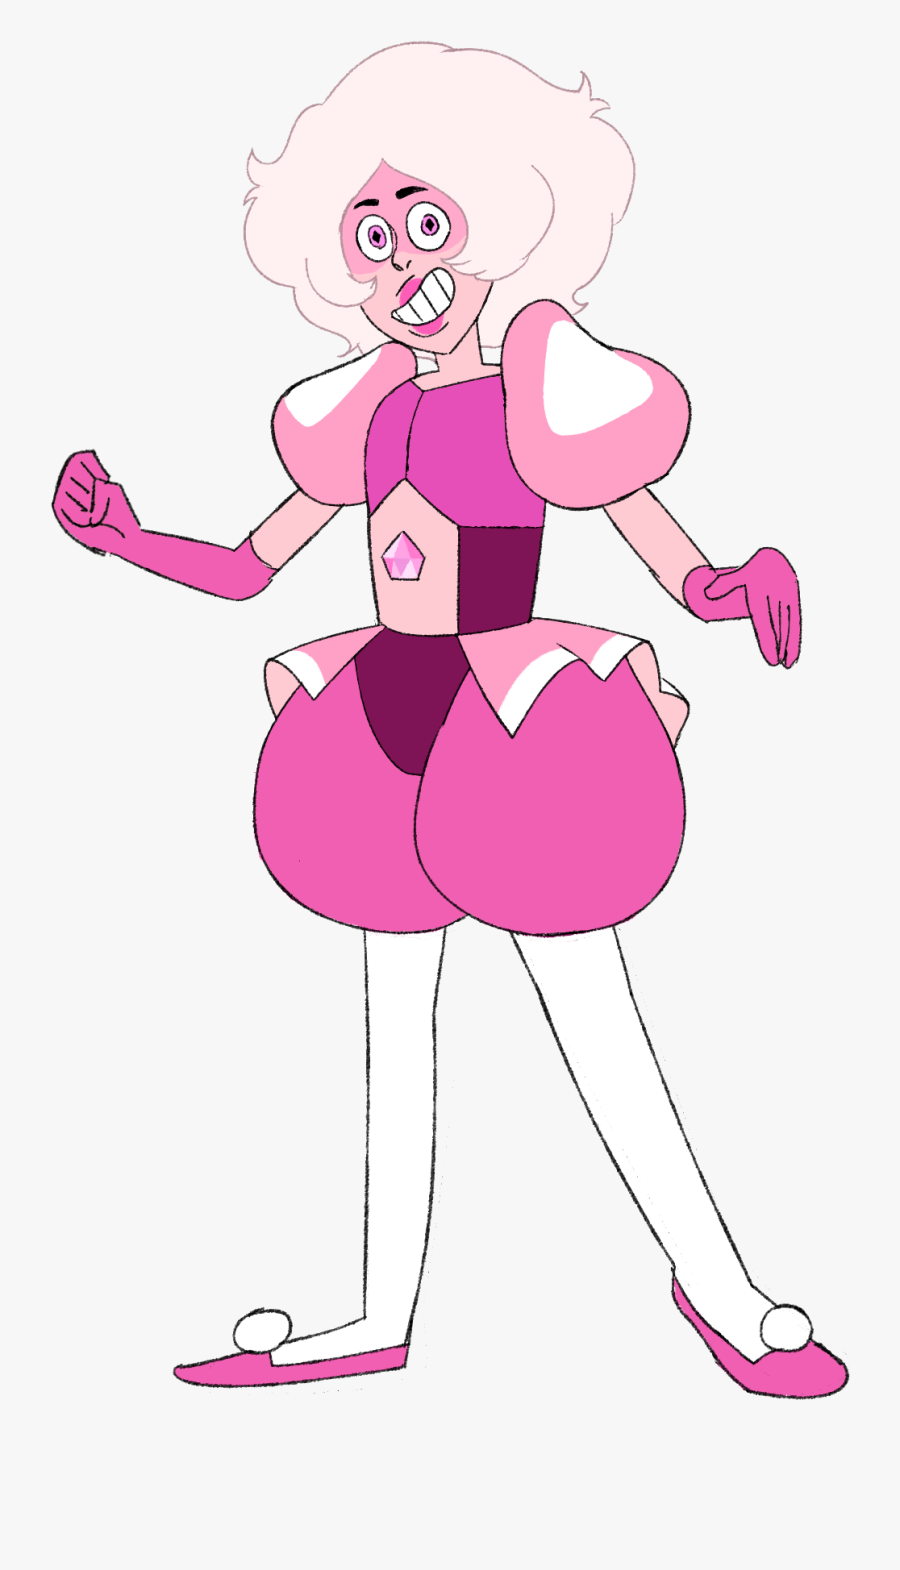 “ 🌸pink Diamond 🌸 ”
i Keep Loving Her More And More
”
pink - Steven Universe Pink Diamond Gemcrust, Transparent Clipart